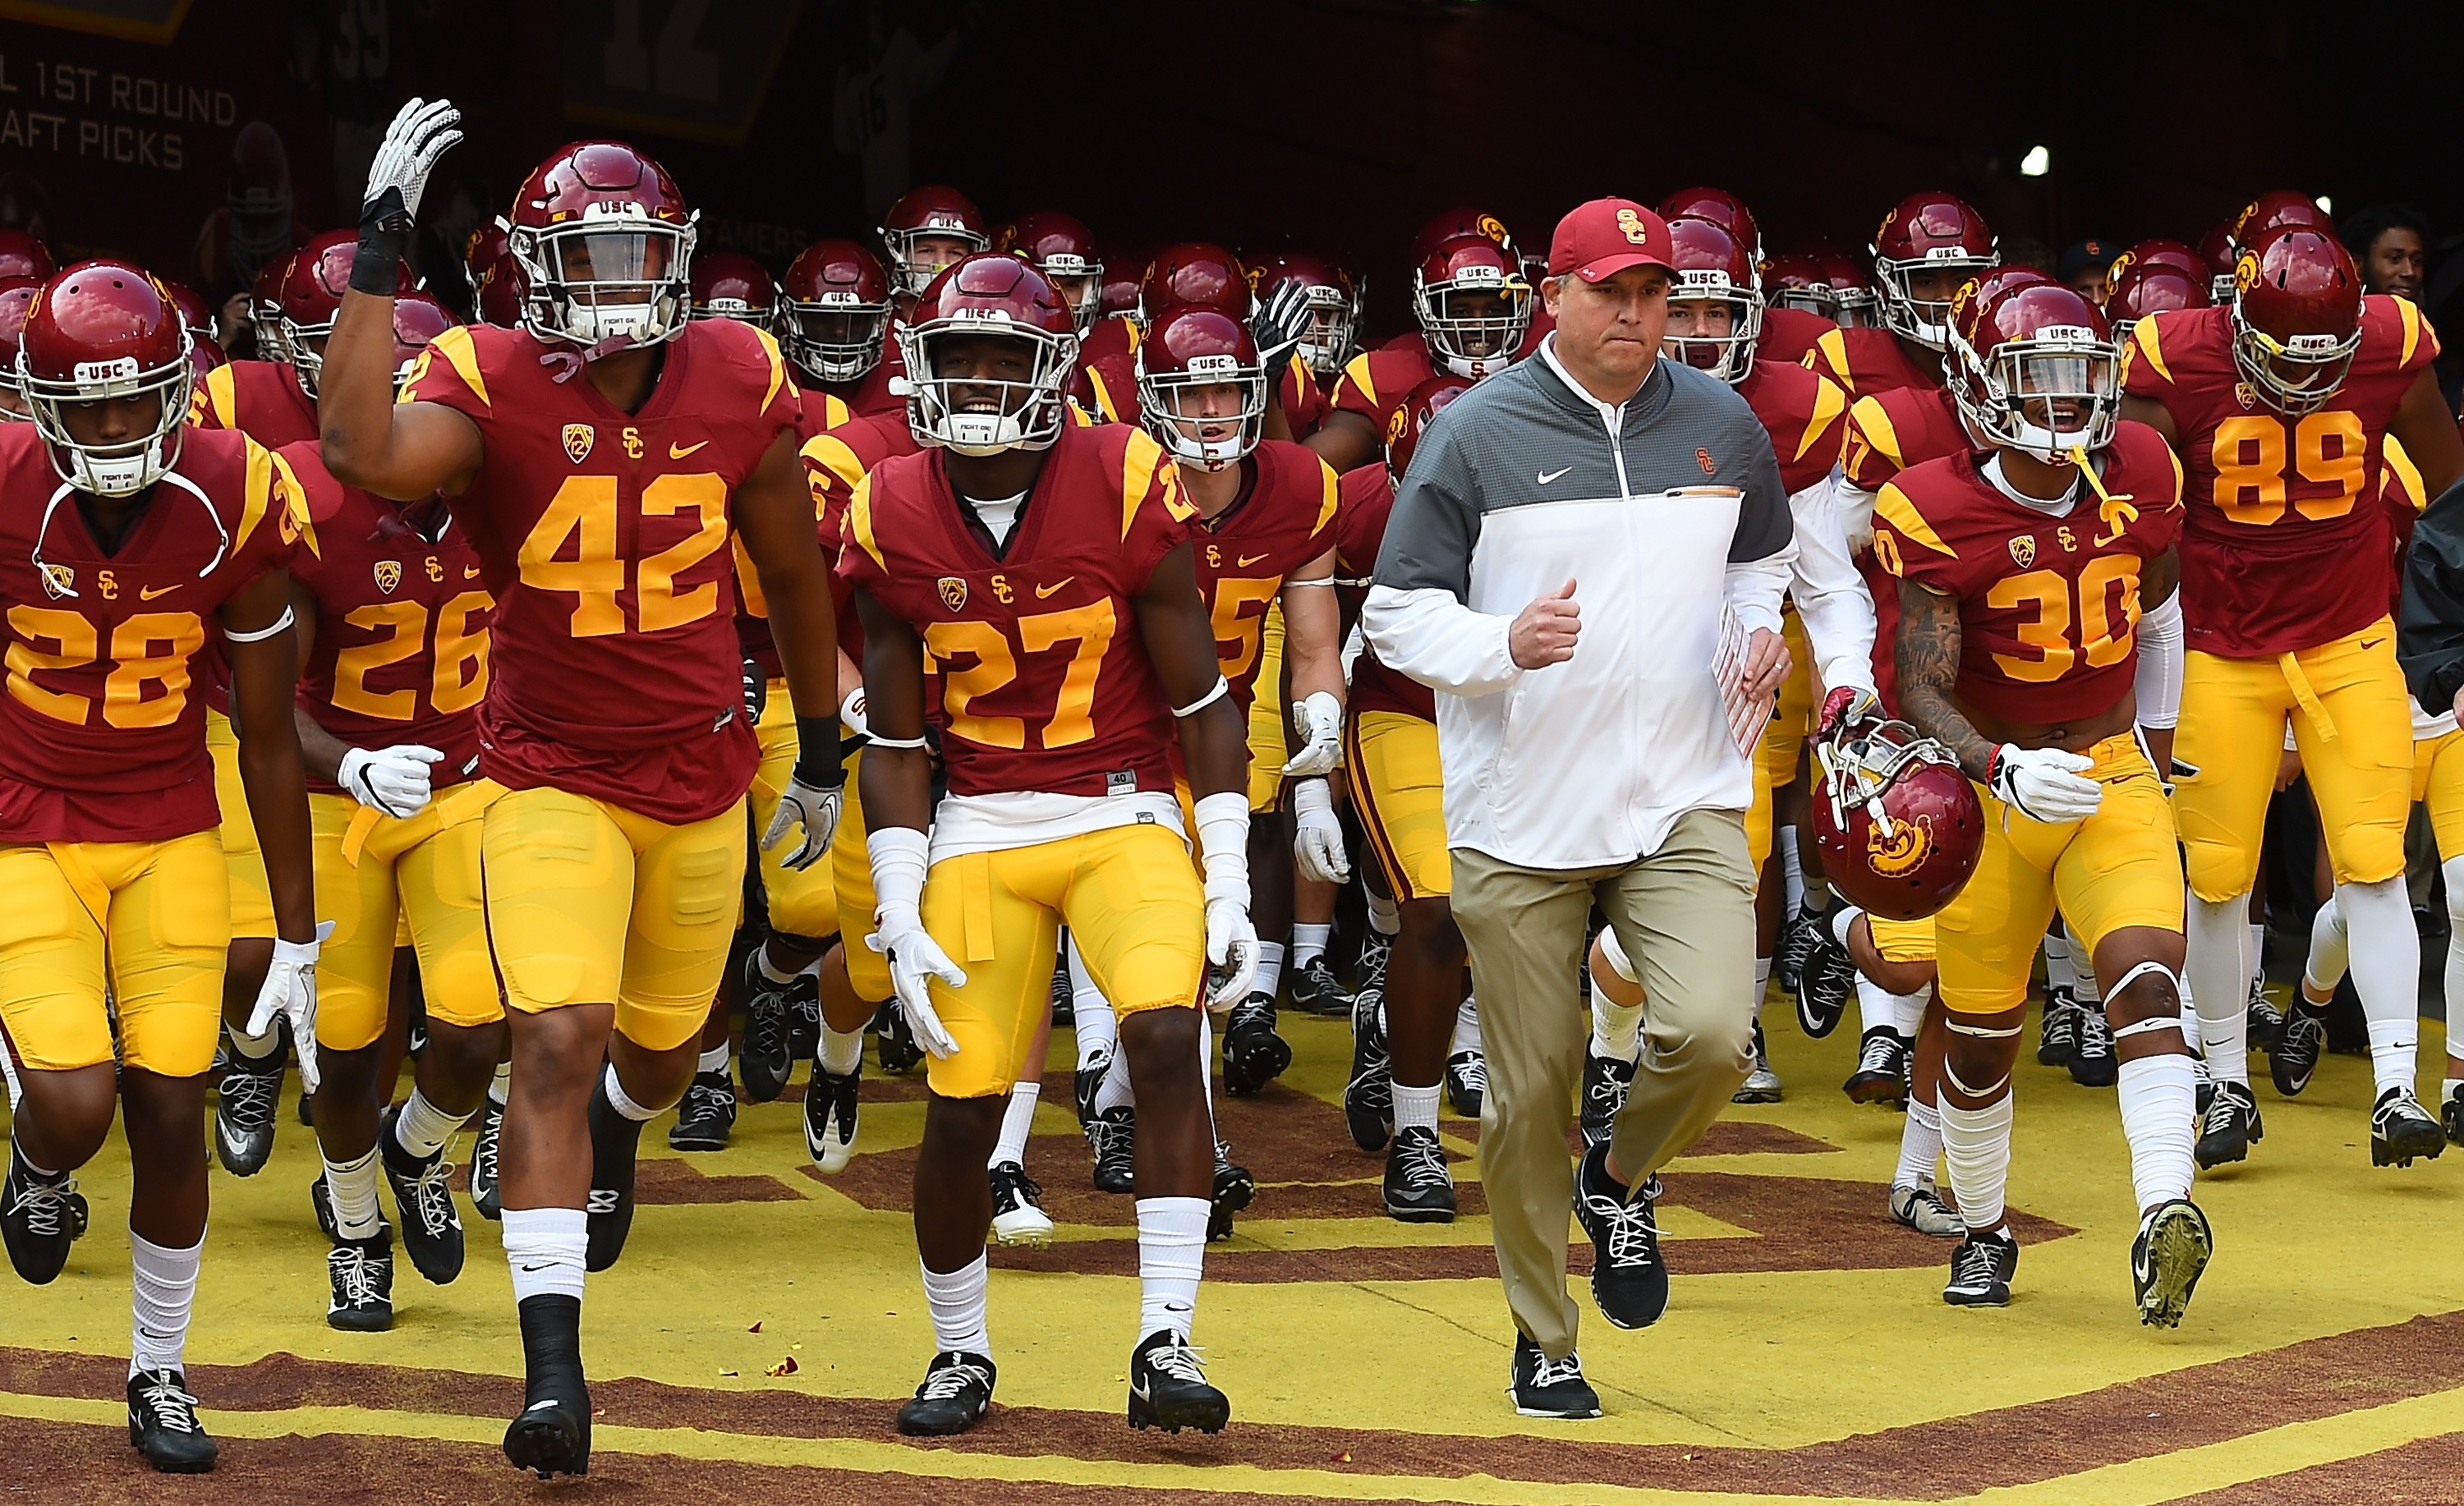 USC Football: Trojan Freshman officially assigned jersey numbers